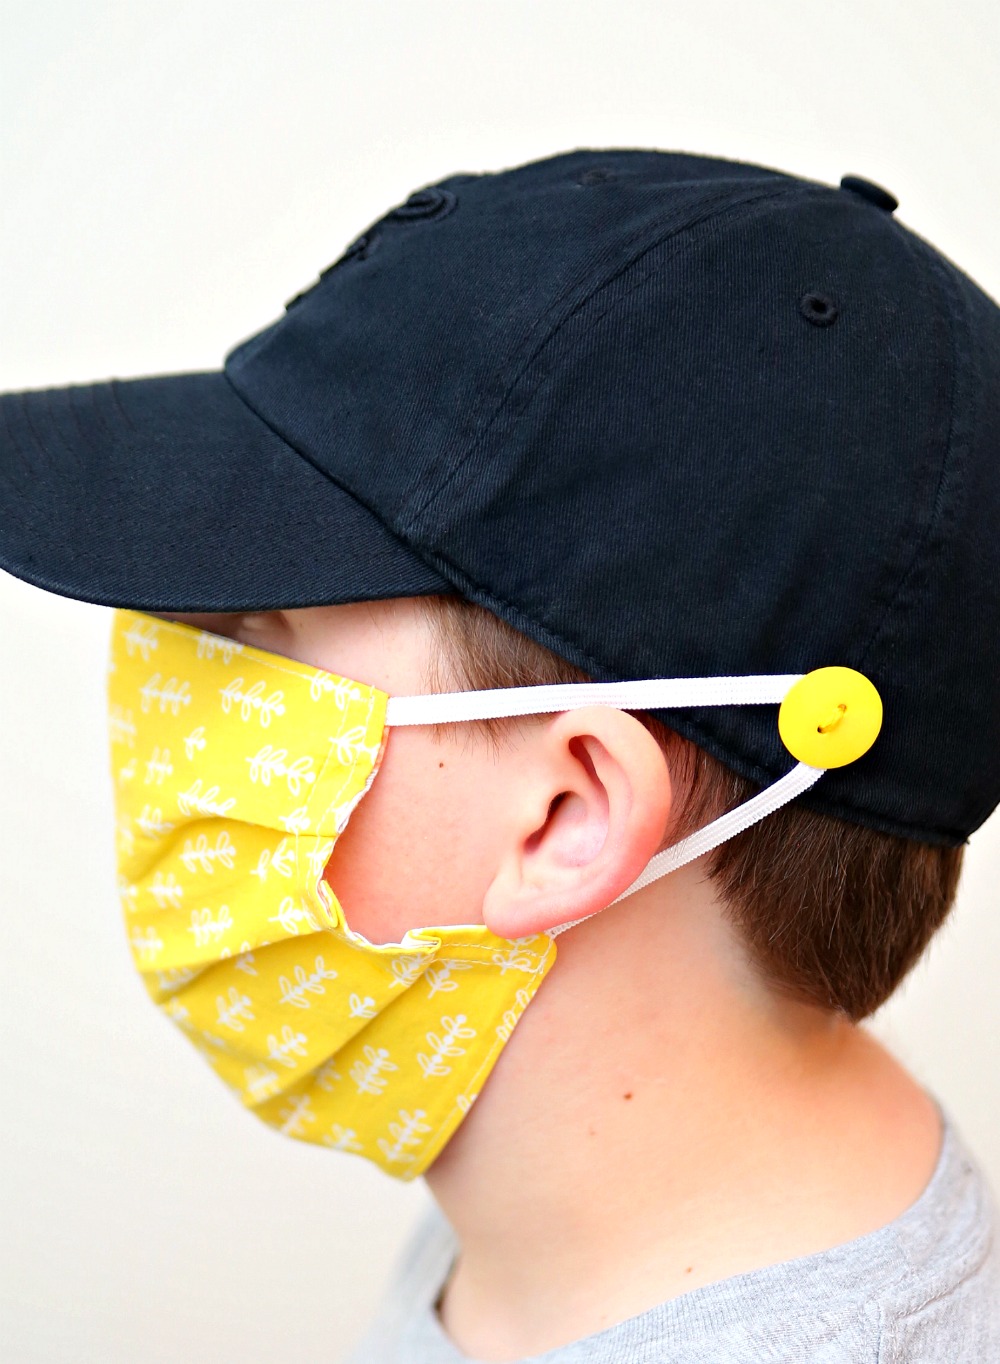 Add buttons to your hat for an easy ear saver